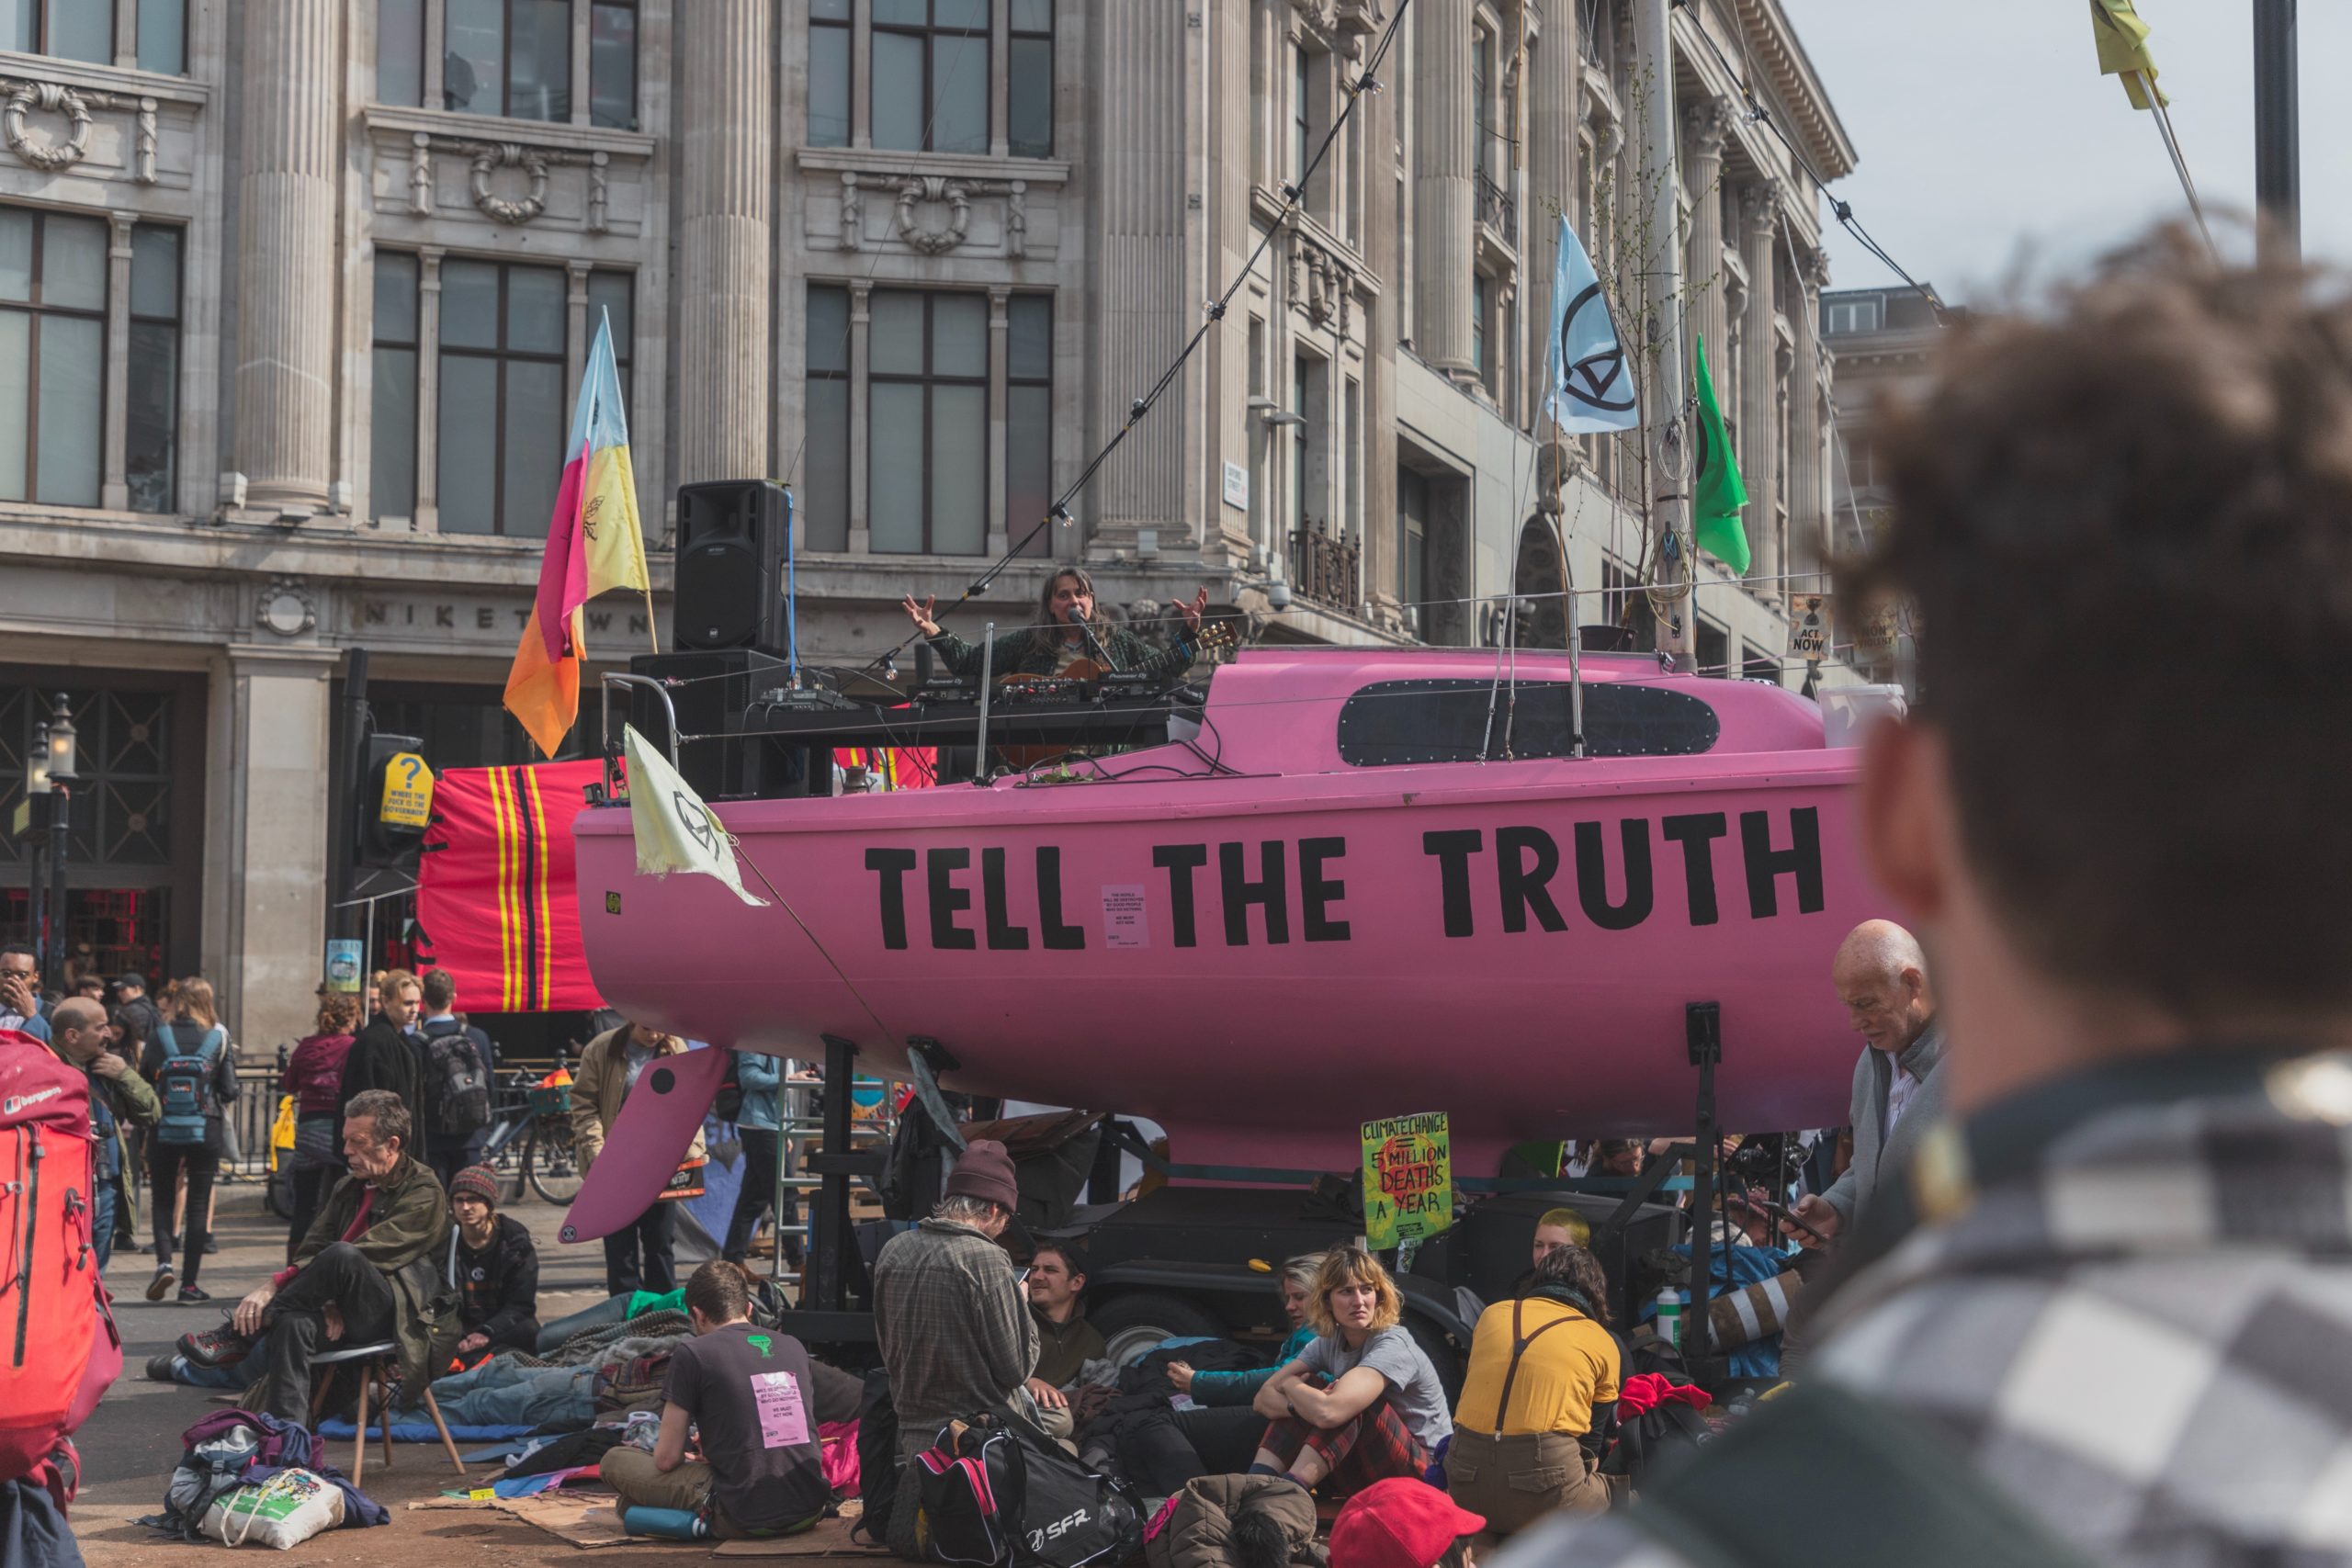 My Experience Marching with Extinction Rebellion